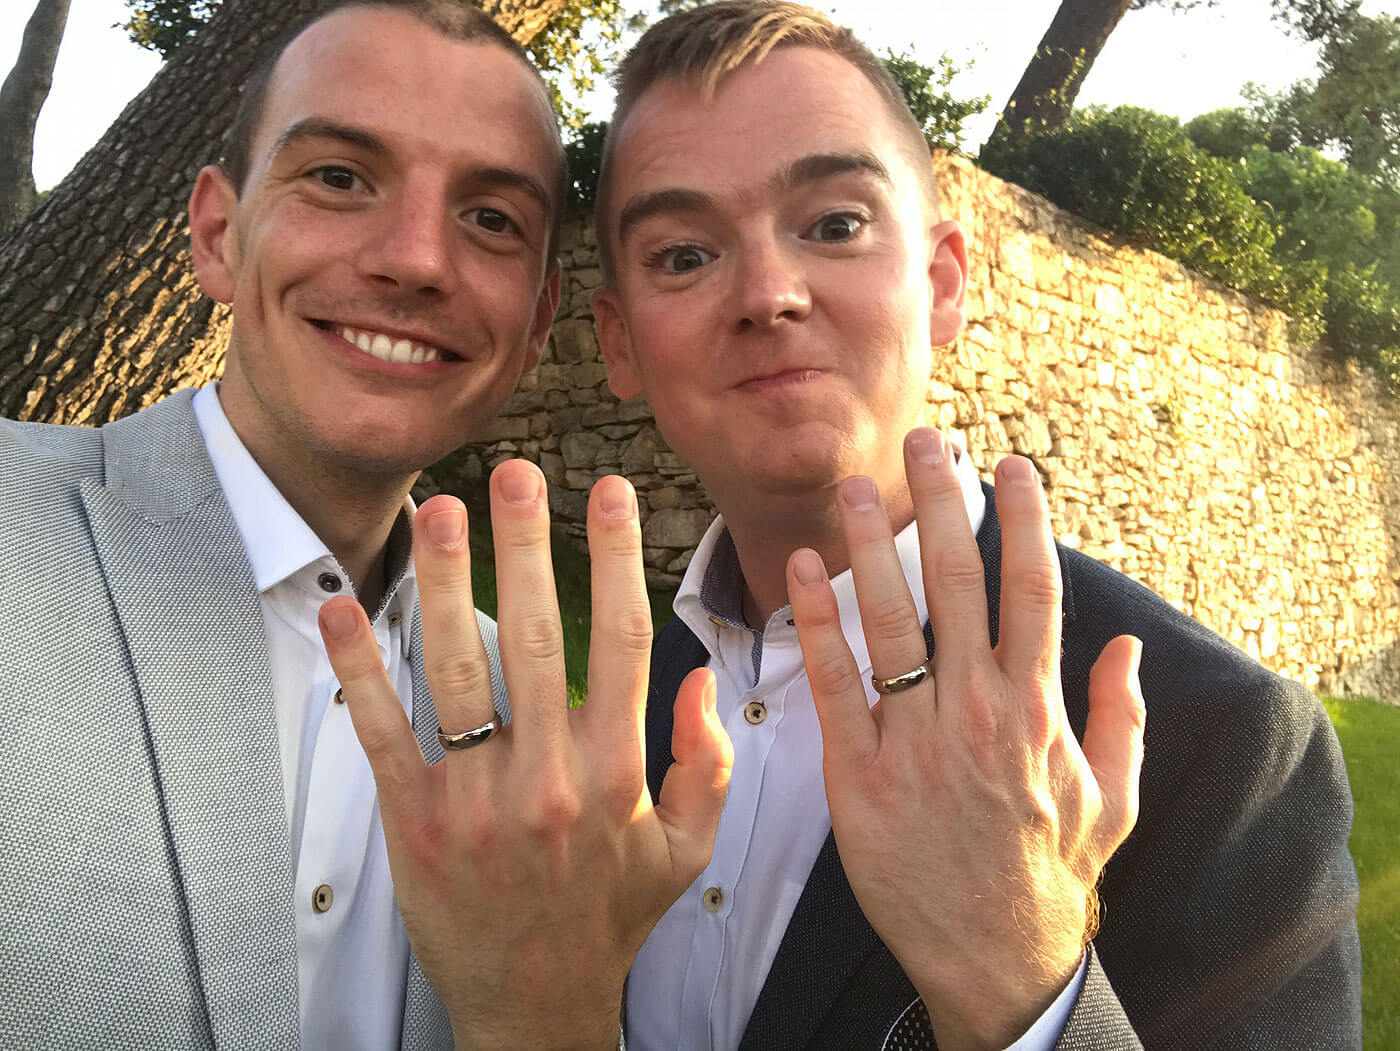 wedding rings on fingers at Nick and Toms real gay wedding croatia via The Gay Wedding Guide 1 5